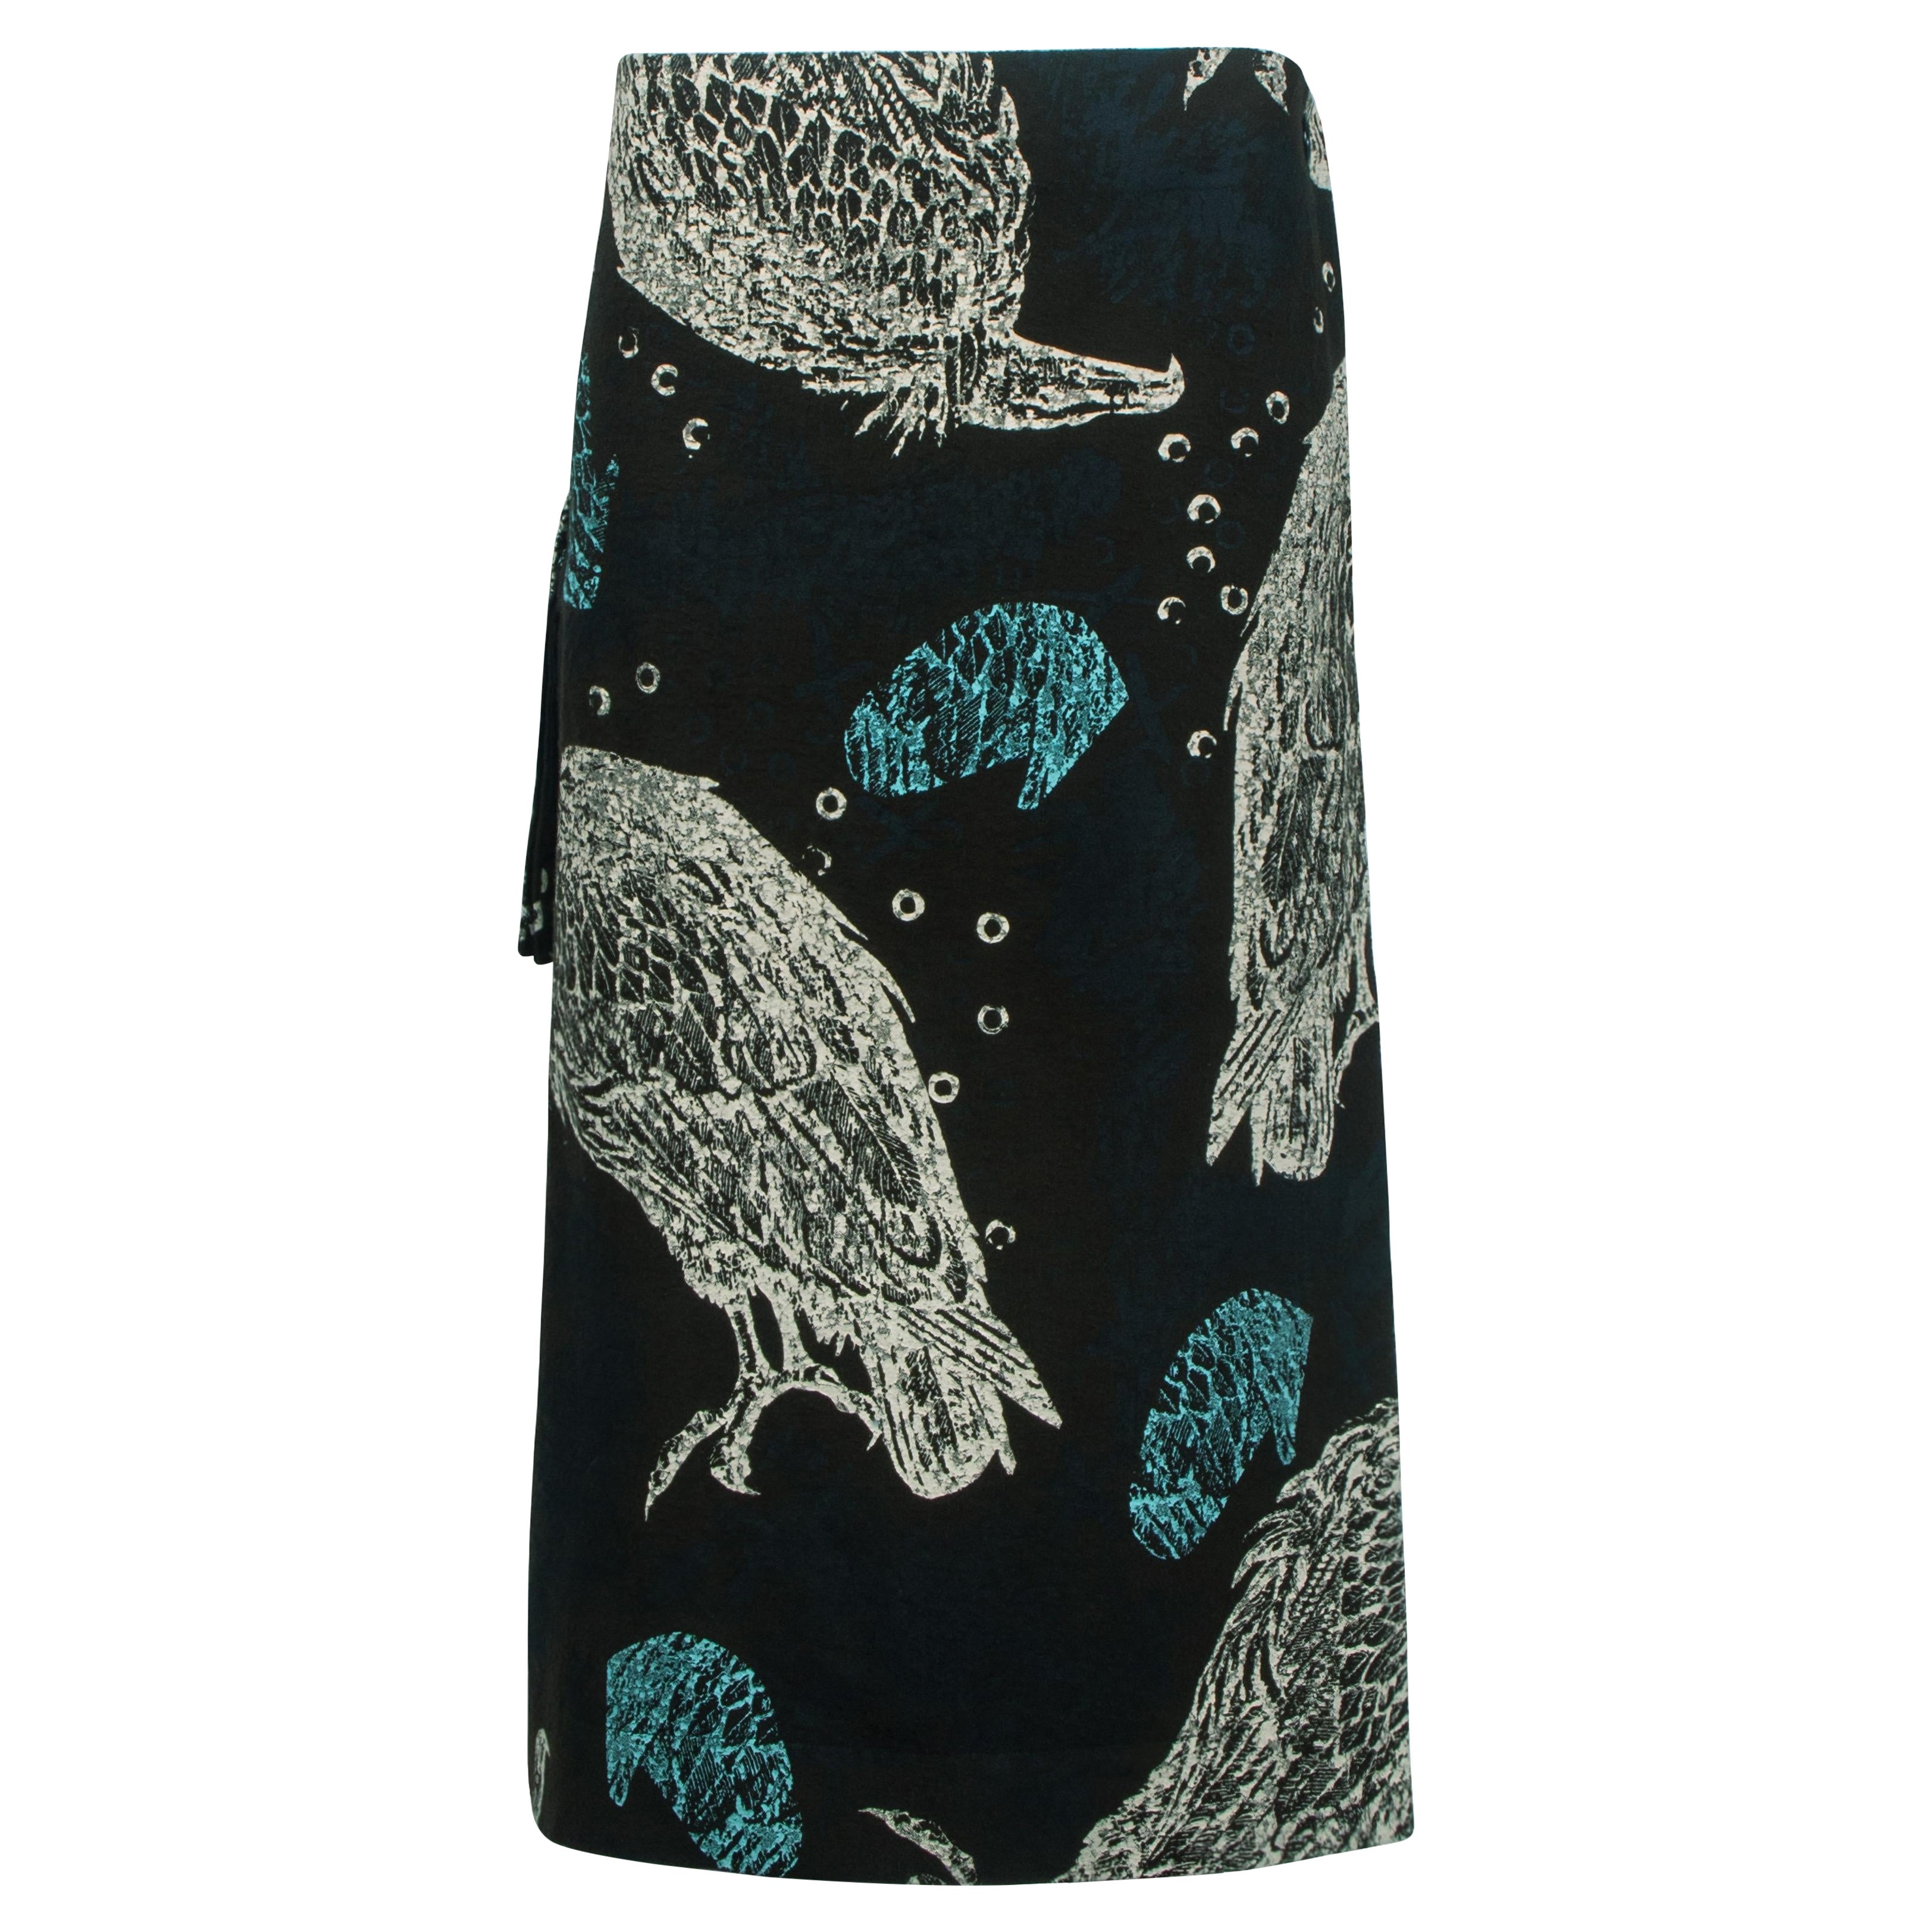 John Galliano ‘The Ludic Games’ vulture skirt, fw 1985 For Sale